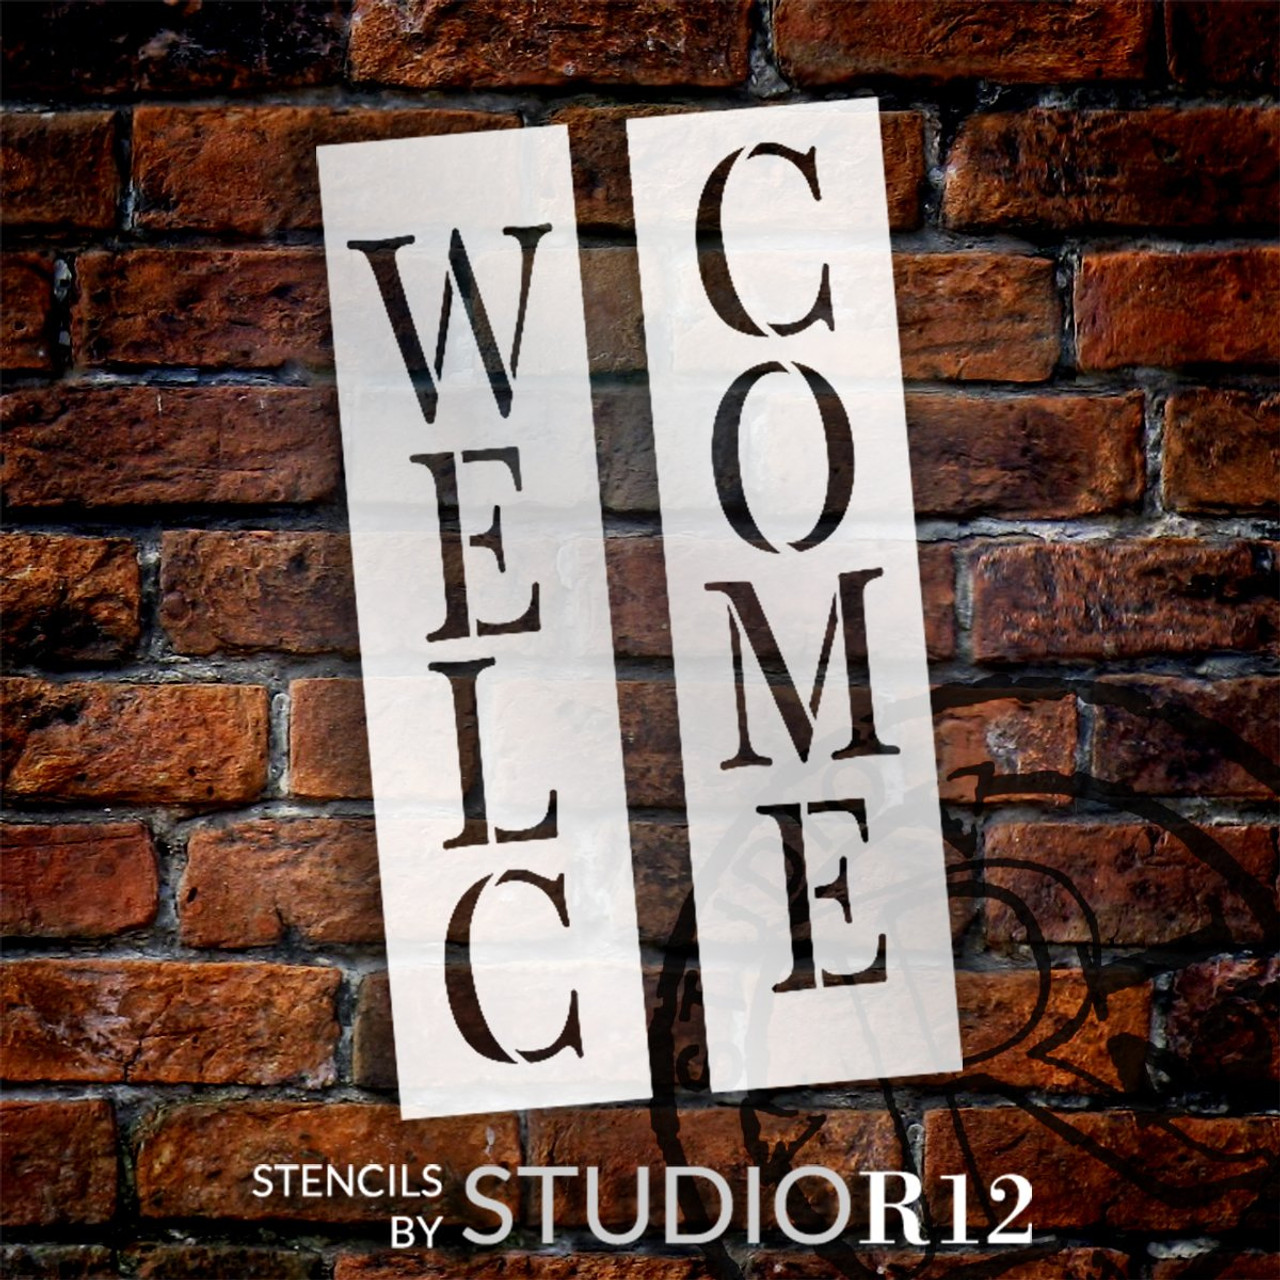 Traditional Serif Welcome Stencil by StudioR12 | DIY Outdoor Farmhouse Home Decor | Craft Vertical Wood Leaner Signs | Select Size